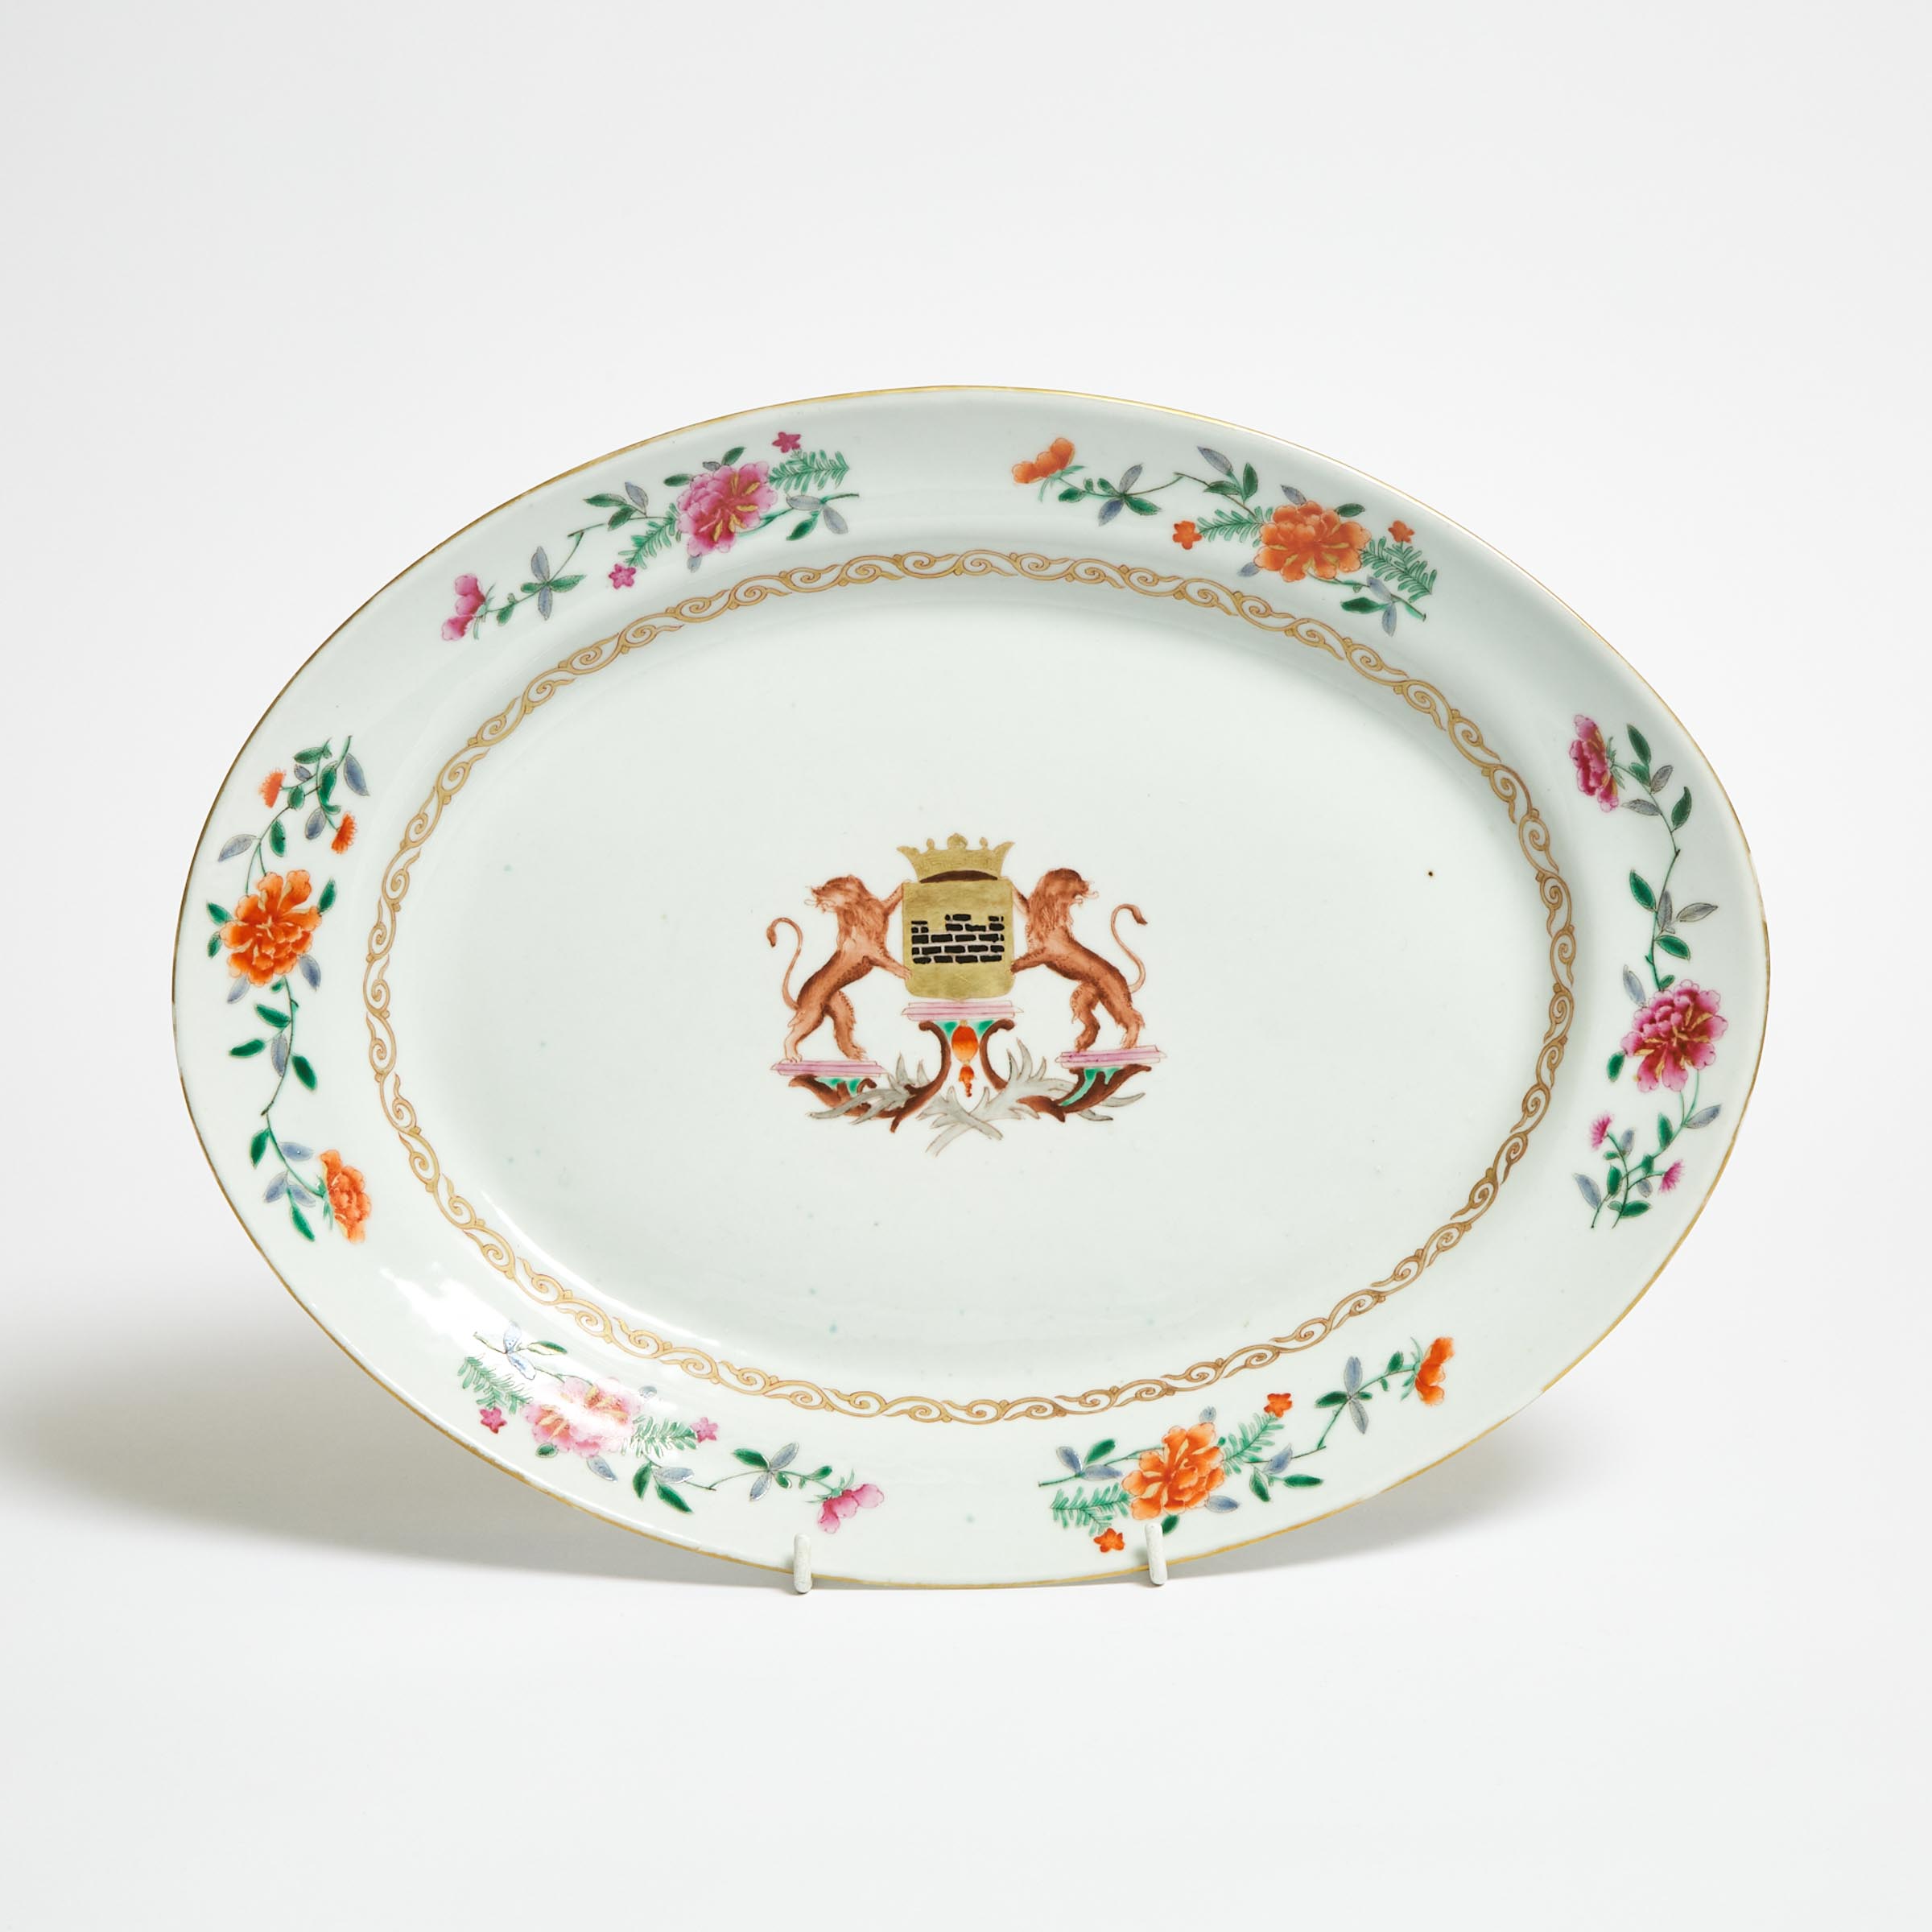 A Large Famille Rose Armorial Oval Platter, 18th Century